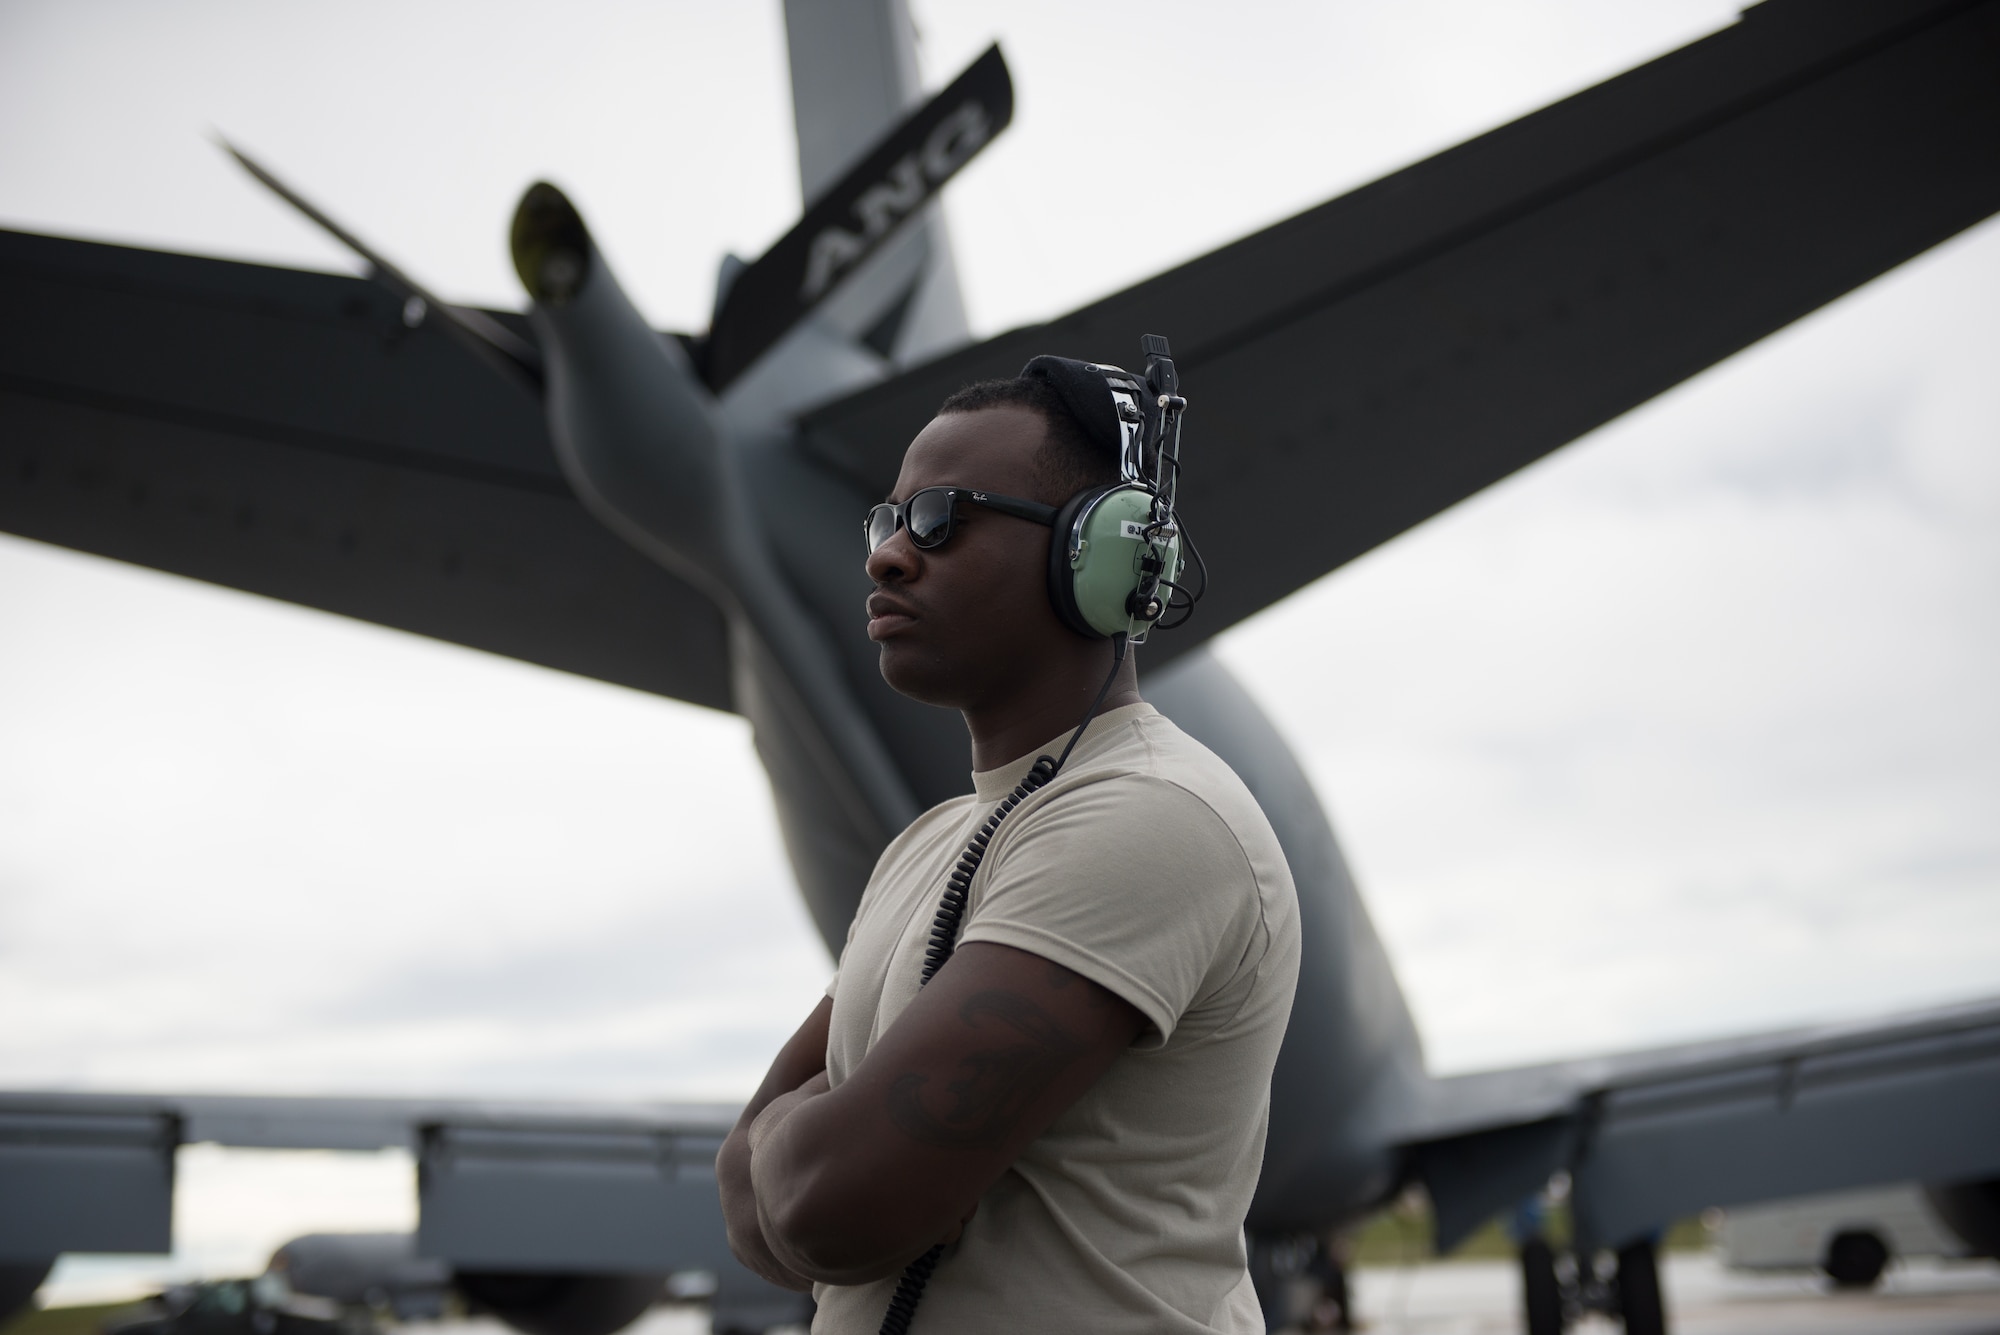 Airman 1st Class Jermarcus Thedford, a crew chief from the 186th Air Refueling Wing, M.S., waits to begin a preflight inspection for a KC-135 Stratotanker, Jan. 21, 2015, Andersen AFB, Guam. Thedford is assigned to the tanker which is deployed from the 157th Air Refueling Wing, N.H. along with crew chiefs also from the 157 ARW. The tanker is deployed to the 506th Expeditionary Air Refueling Squadron, Guam, to complete refueling missions for Andersen’s current fighters, airlifter, and bombers’ missions along the Pacific region. (U.S. Air National Guard photo by Senior Airman Kayla McWalter/RELEASED)